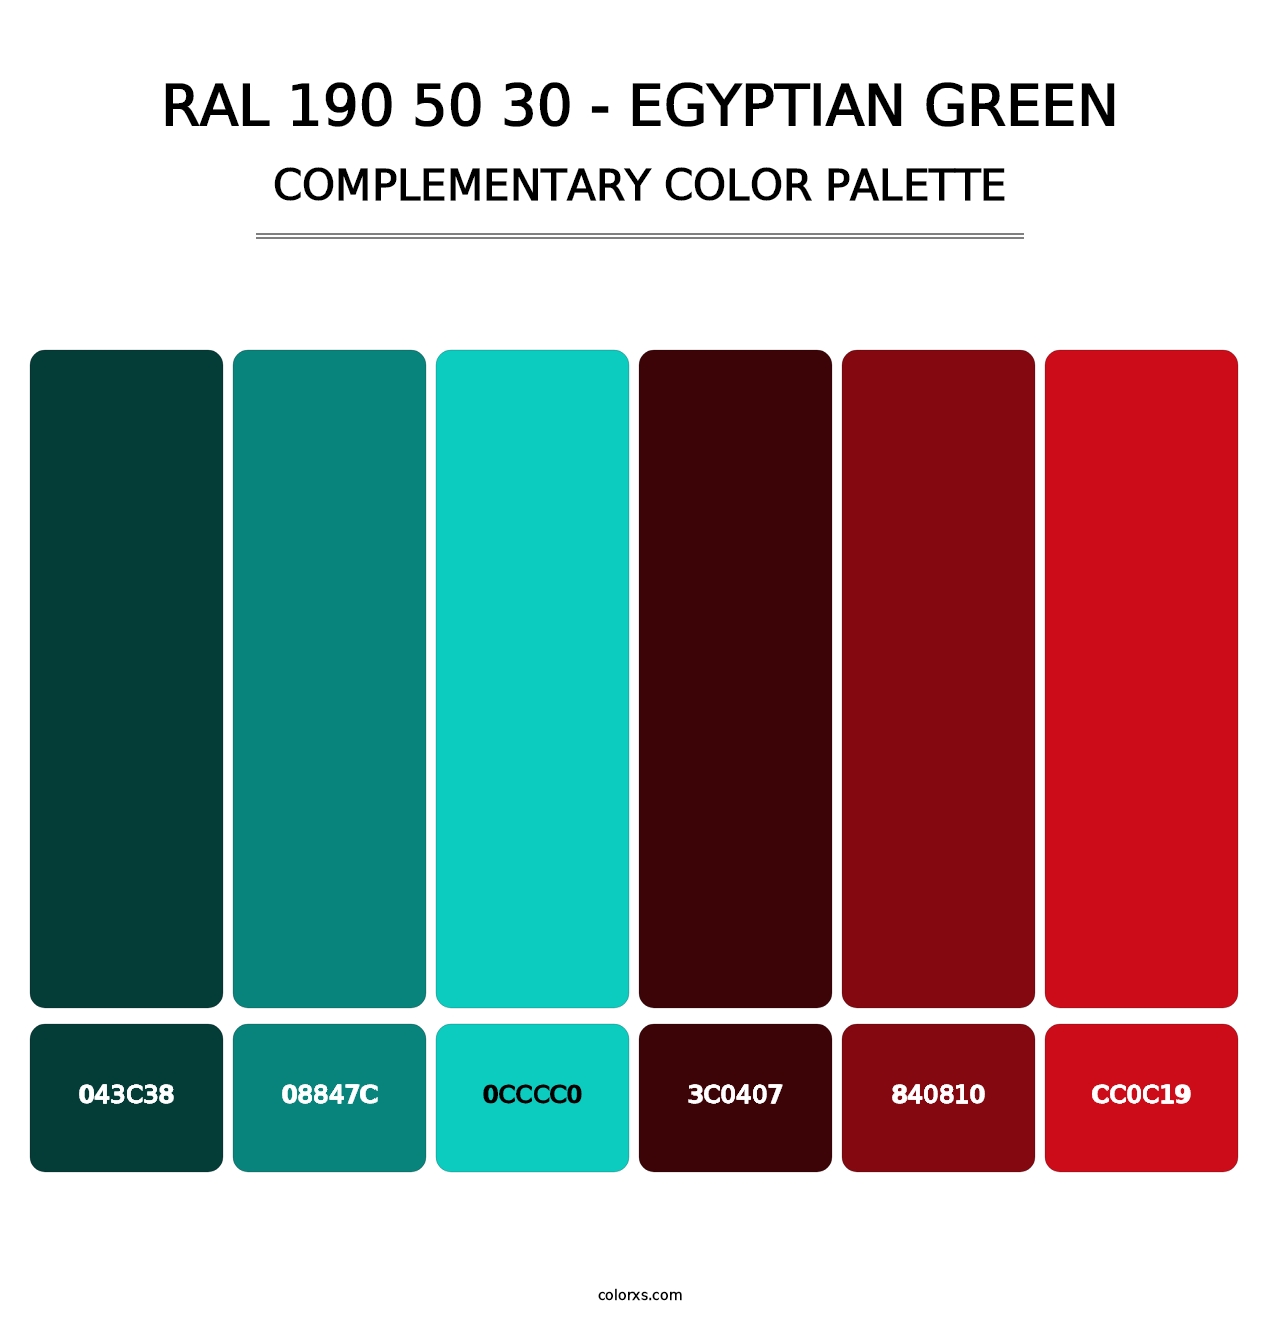 RAL 190 50 30 - Egyptian Green - Complementary Color Palette